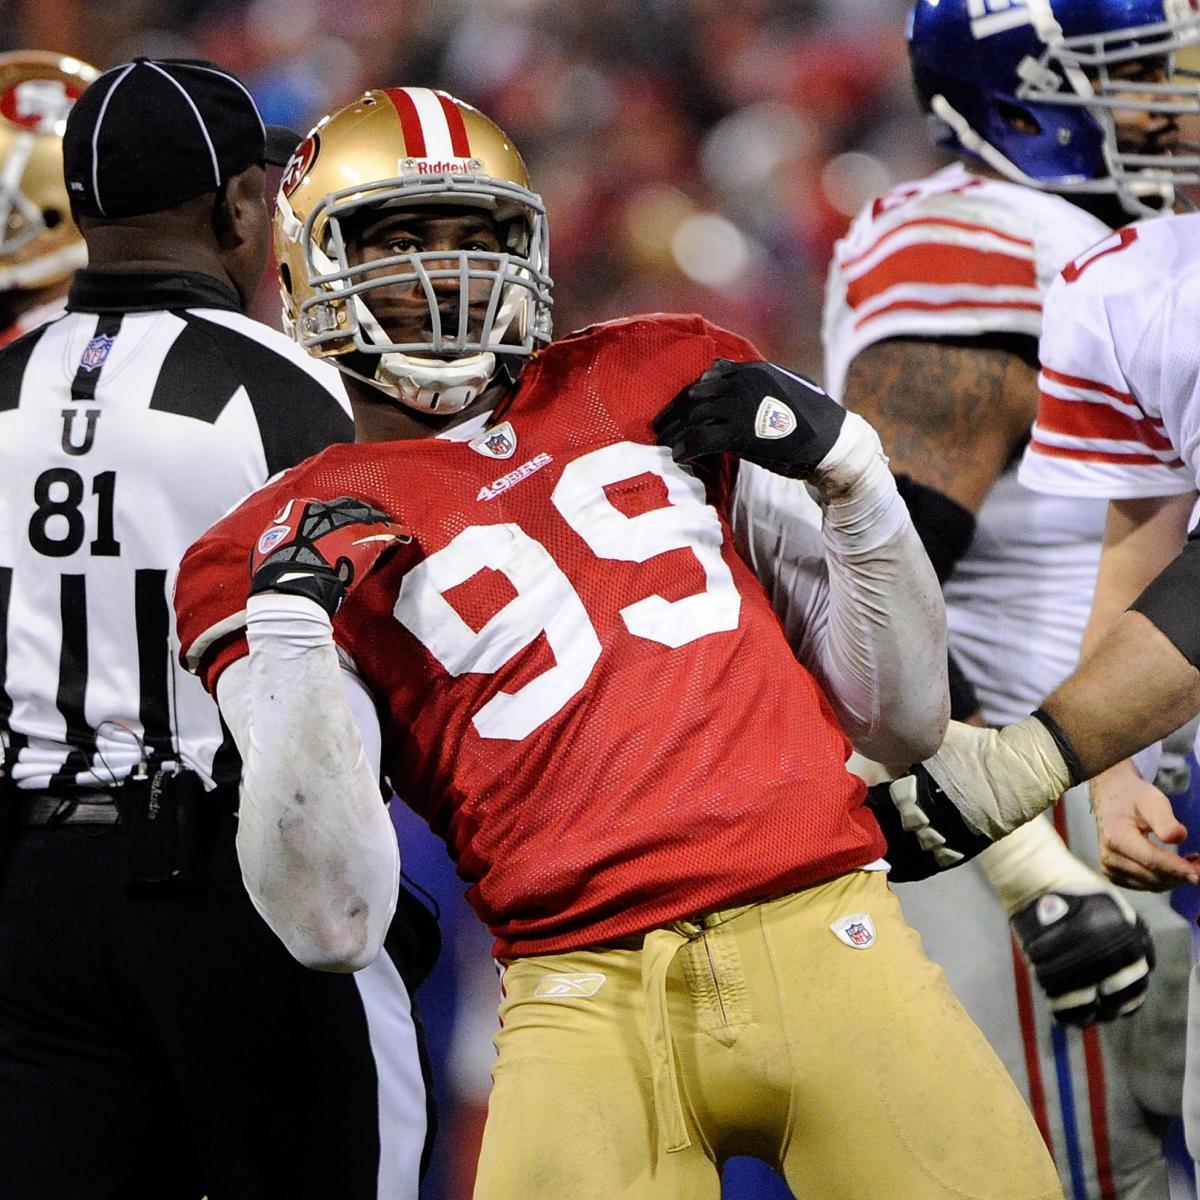 Aldon Smith Stabbed: 49ers Star Wounded in Altercation at Party | Bleacher Report ...